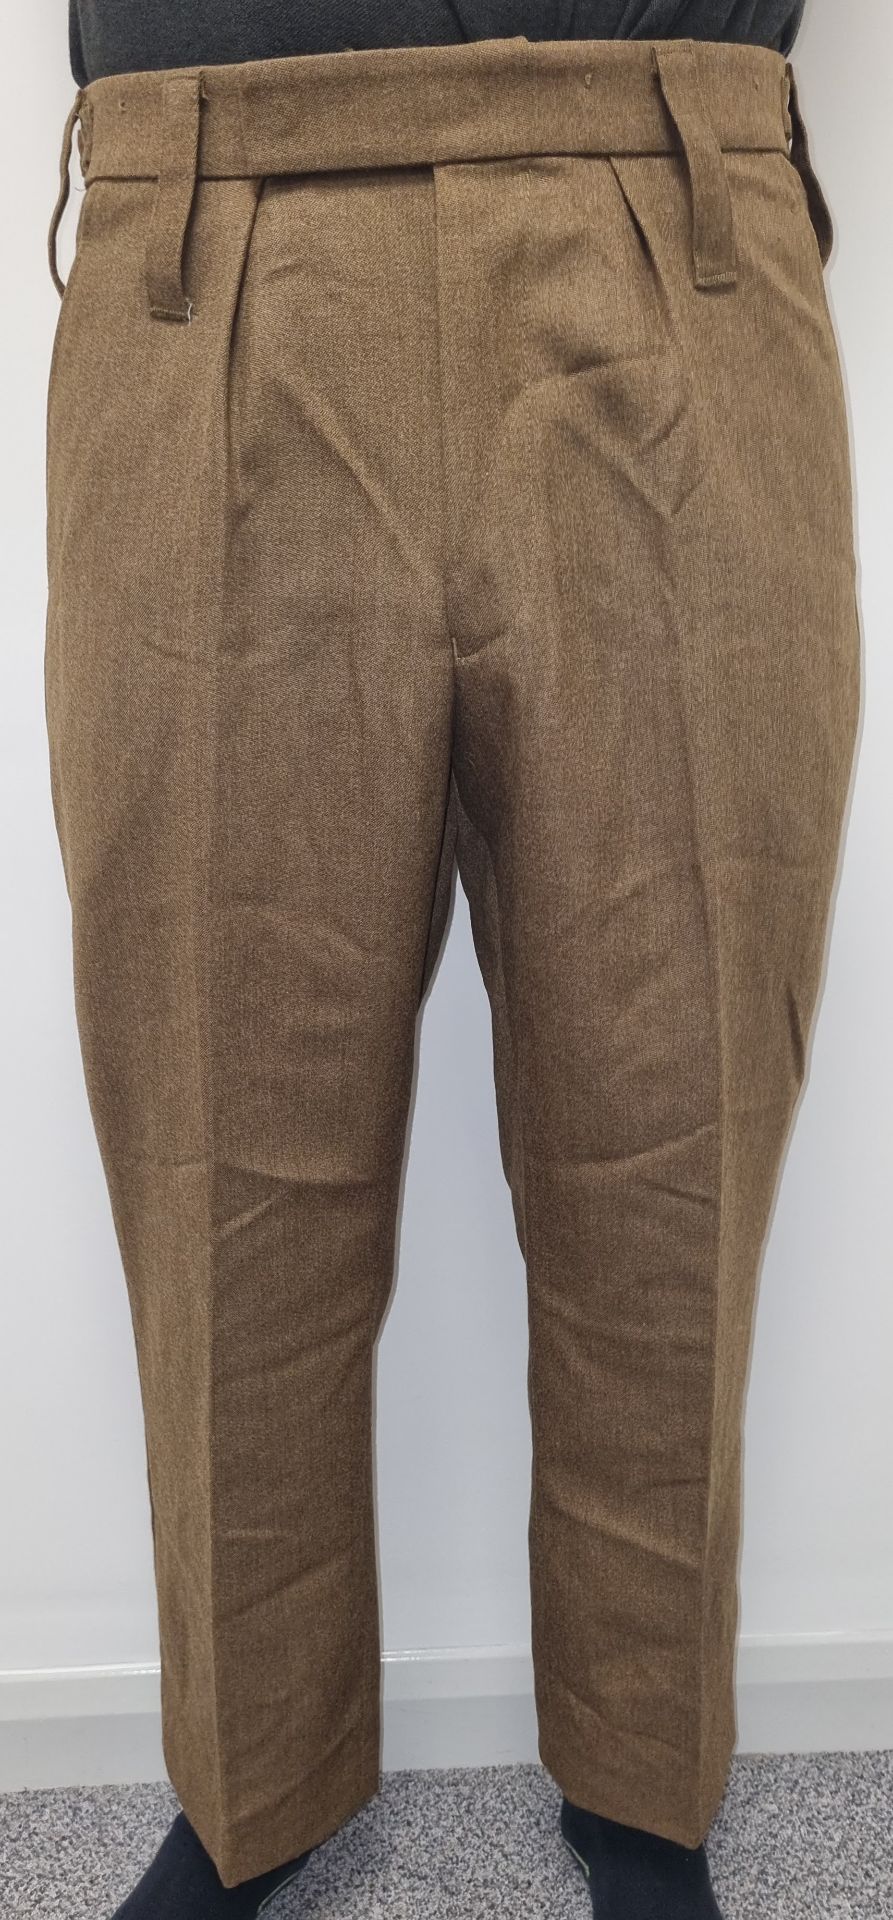 50x British Army No. 2 Dress trousers - mixed grades and sizes